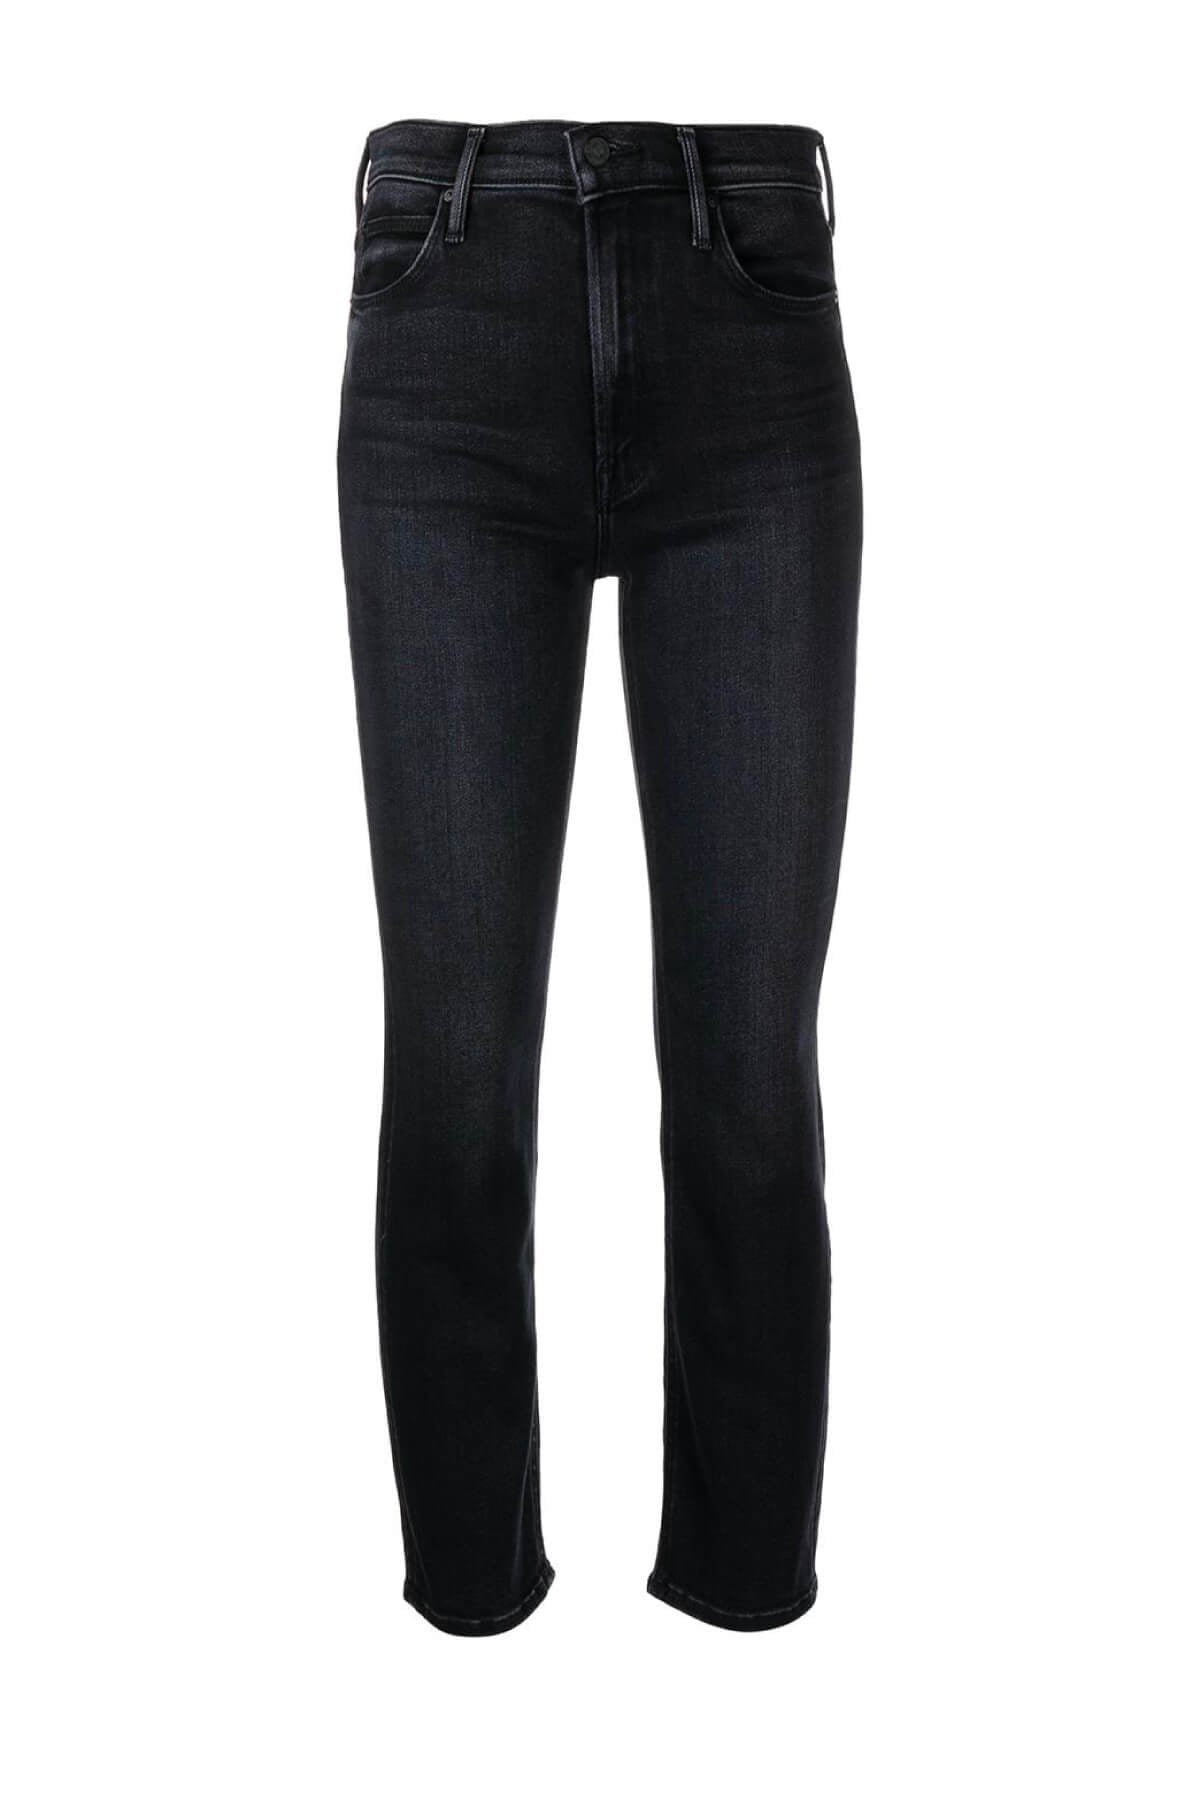 Mother Denim The Mid Rise Dazzler Ankle Jean - Deep End